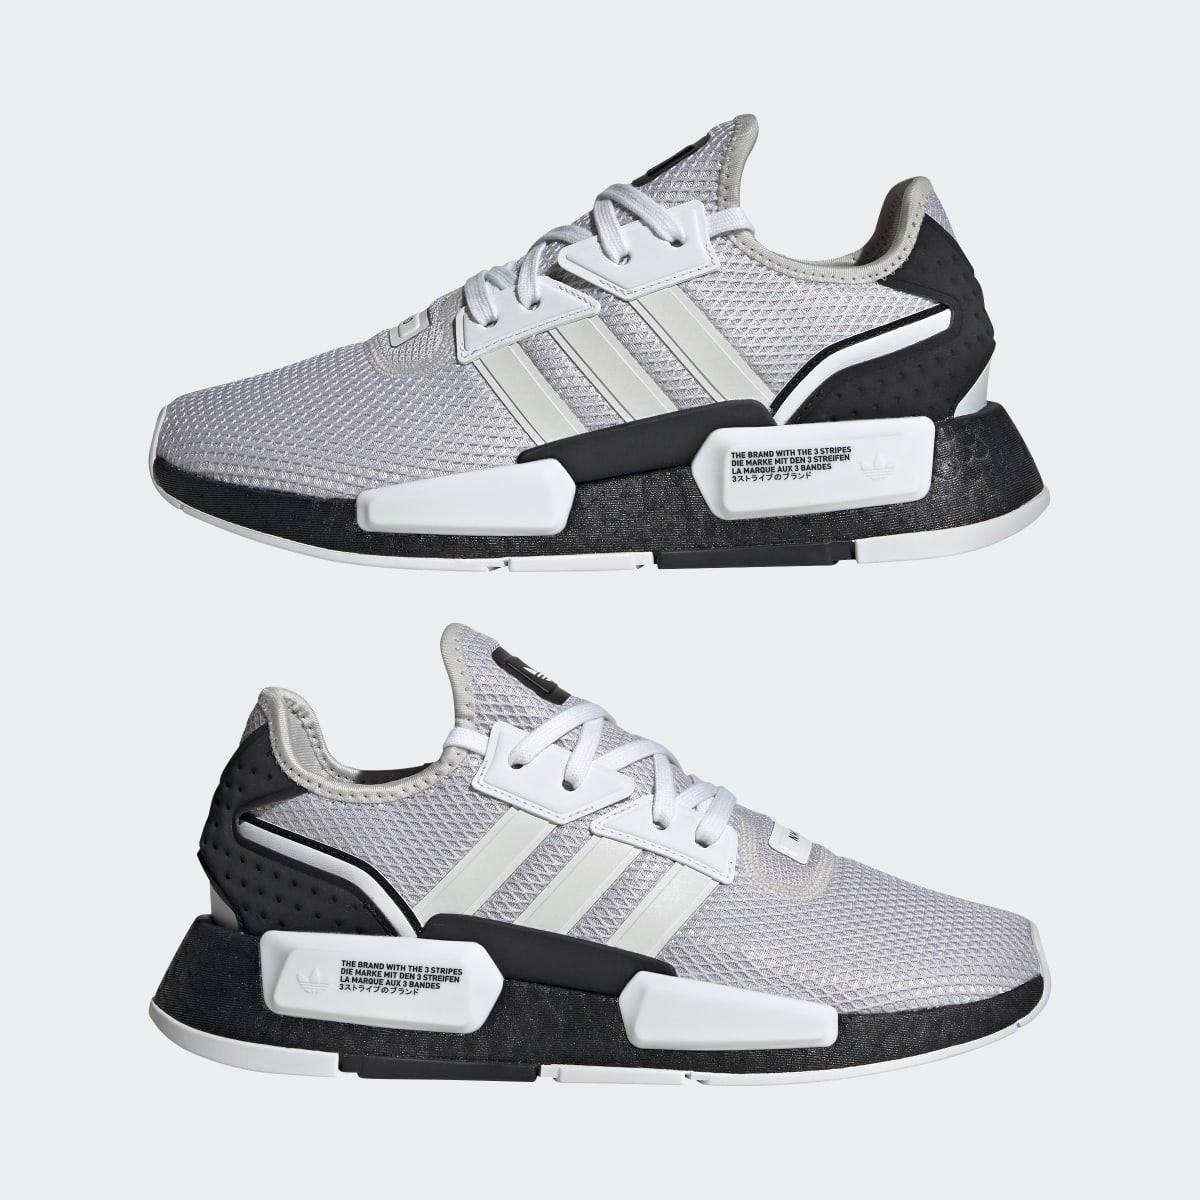 Adidas NMD_G1 Shoes. 11